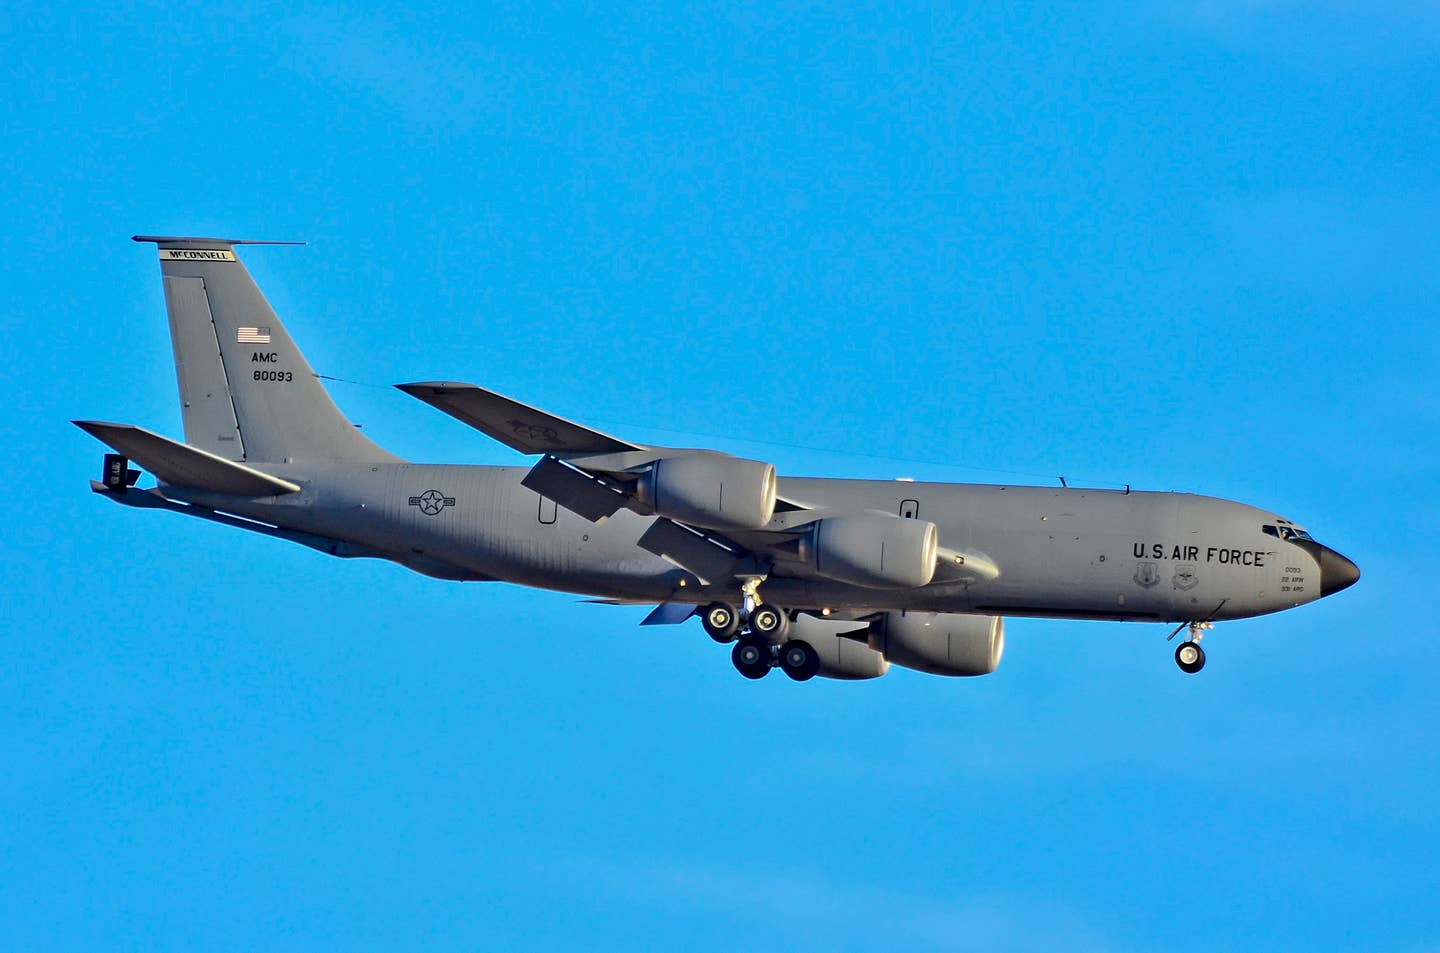 An Air Mobility Command KC-135R in gray scheme pictured at McConnell Air Force Base, Kansas, January 2013. <em>Tomás Del Coro via Wikimedia Commons</em>